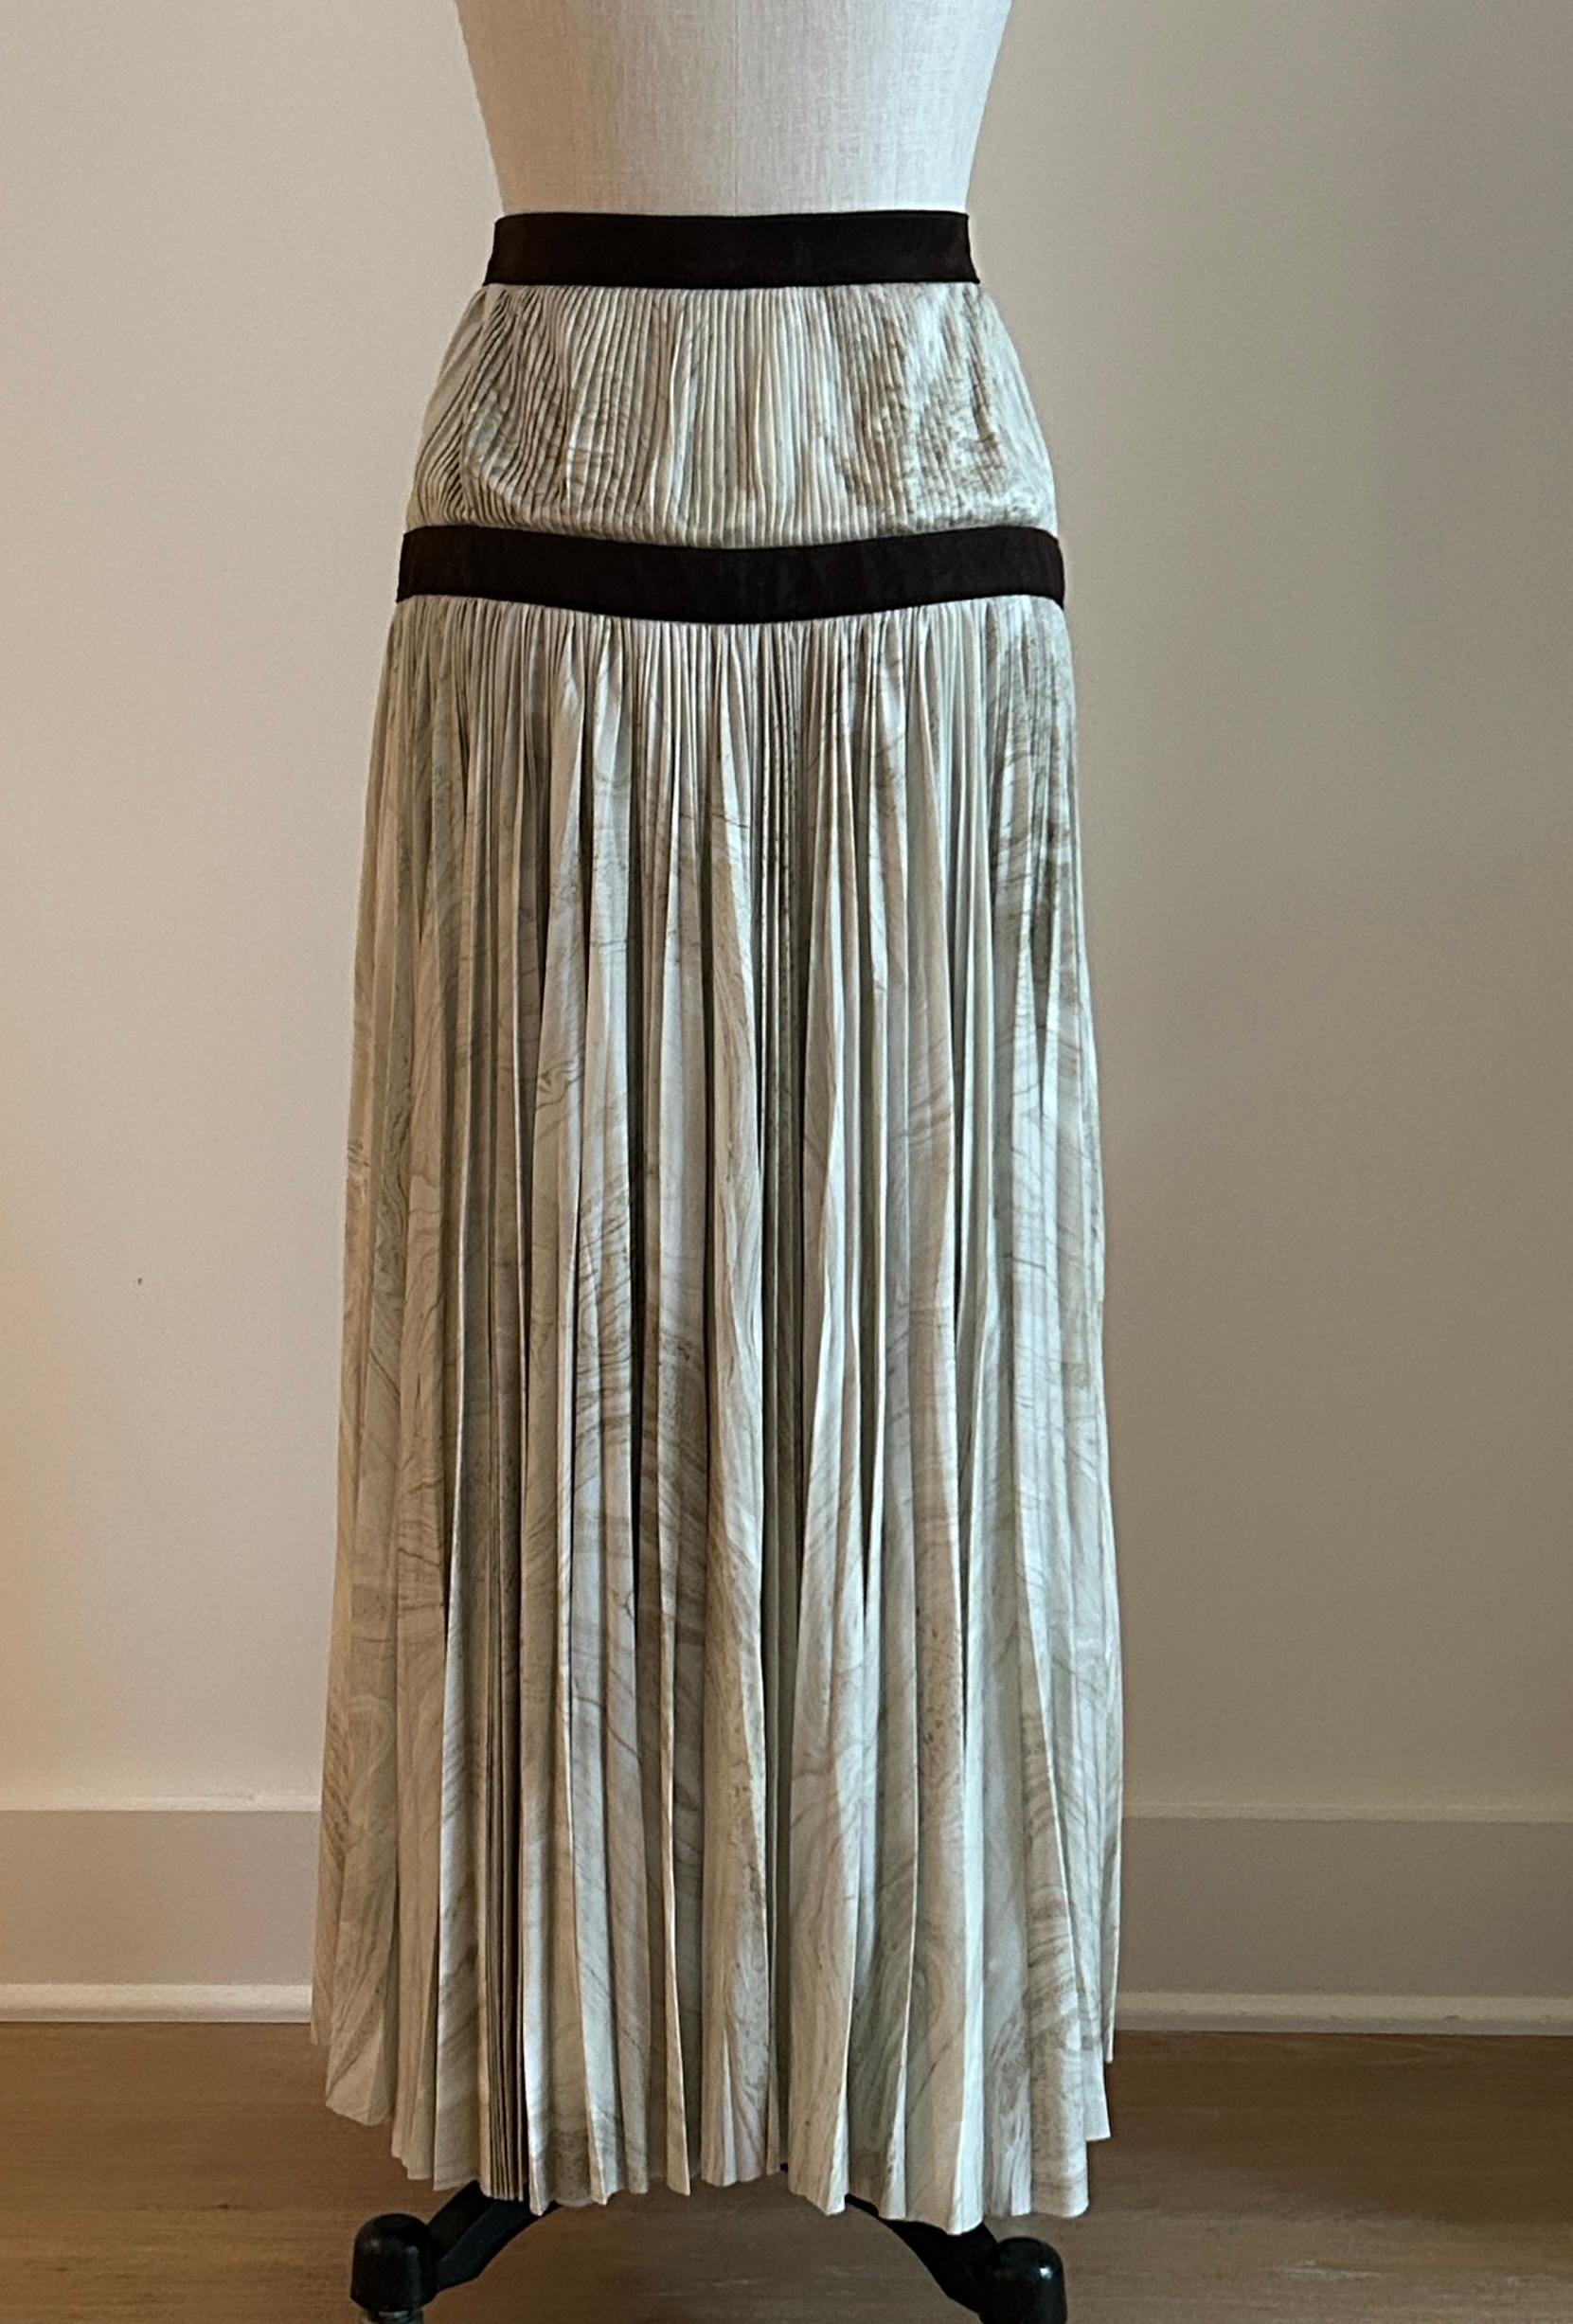 Alexander McQueen Marble Print Pleated Midi Skirt with Suede Detail, 2017 In New Condition For Sale In San Francisco, CA